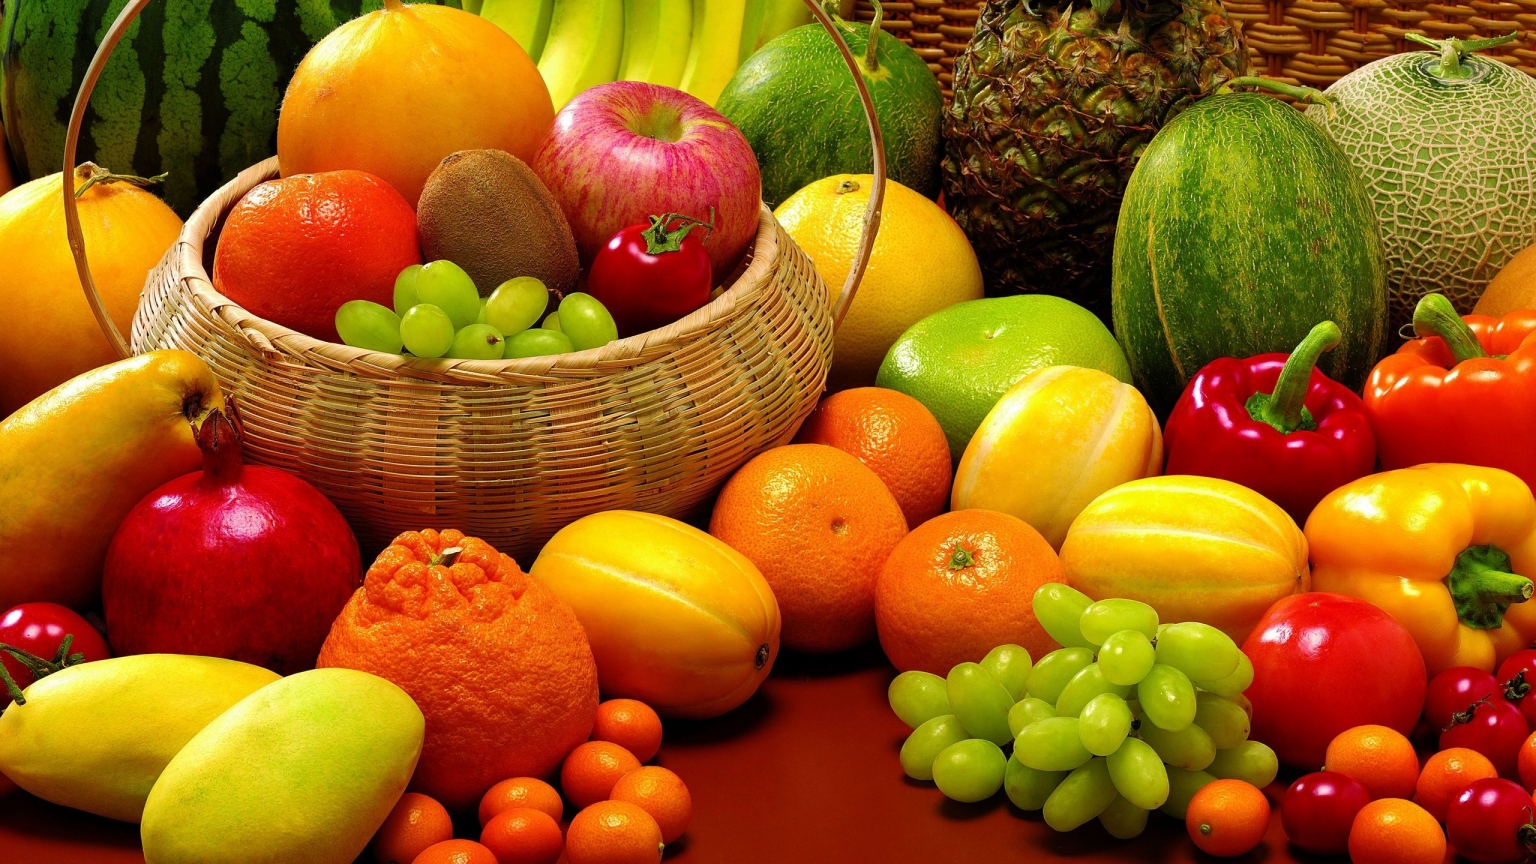 Fruits and Veggies for 1536 x 864 HDTV resolution